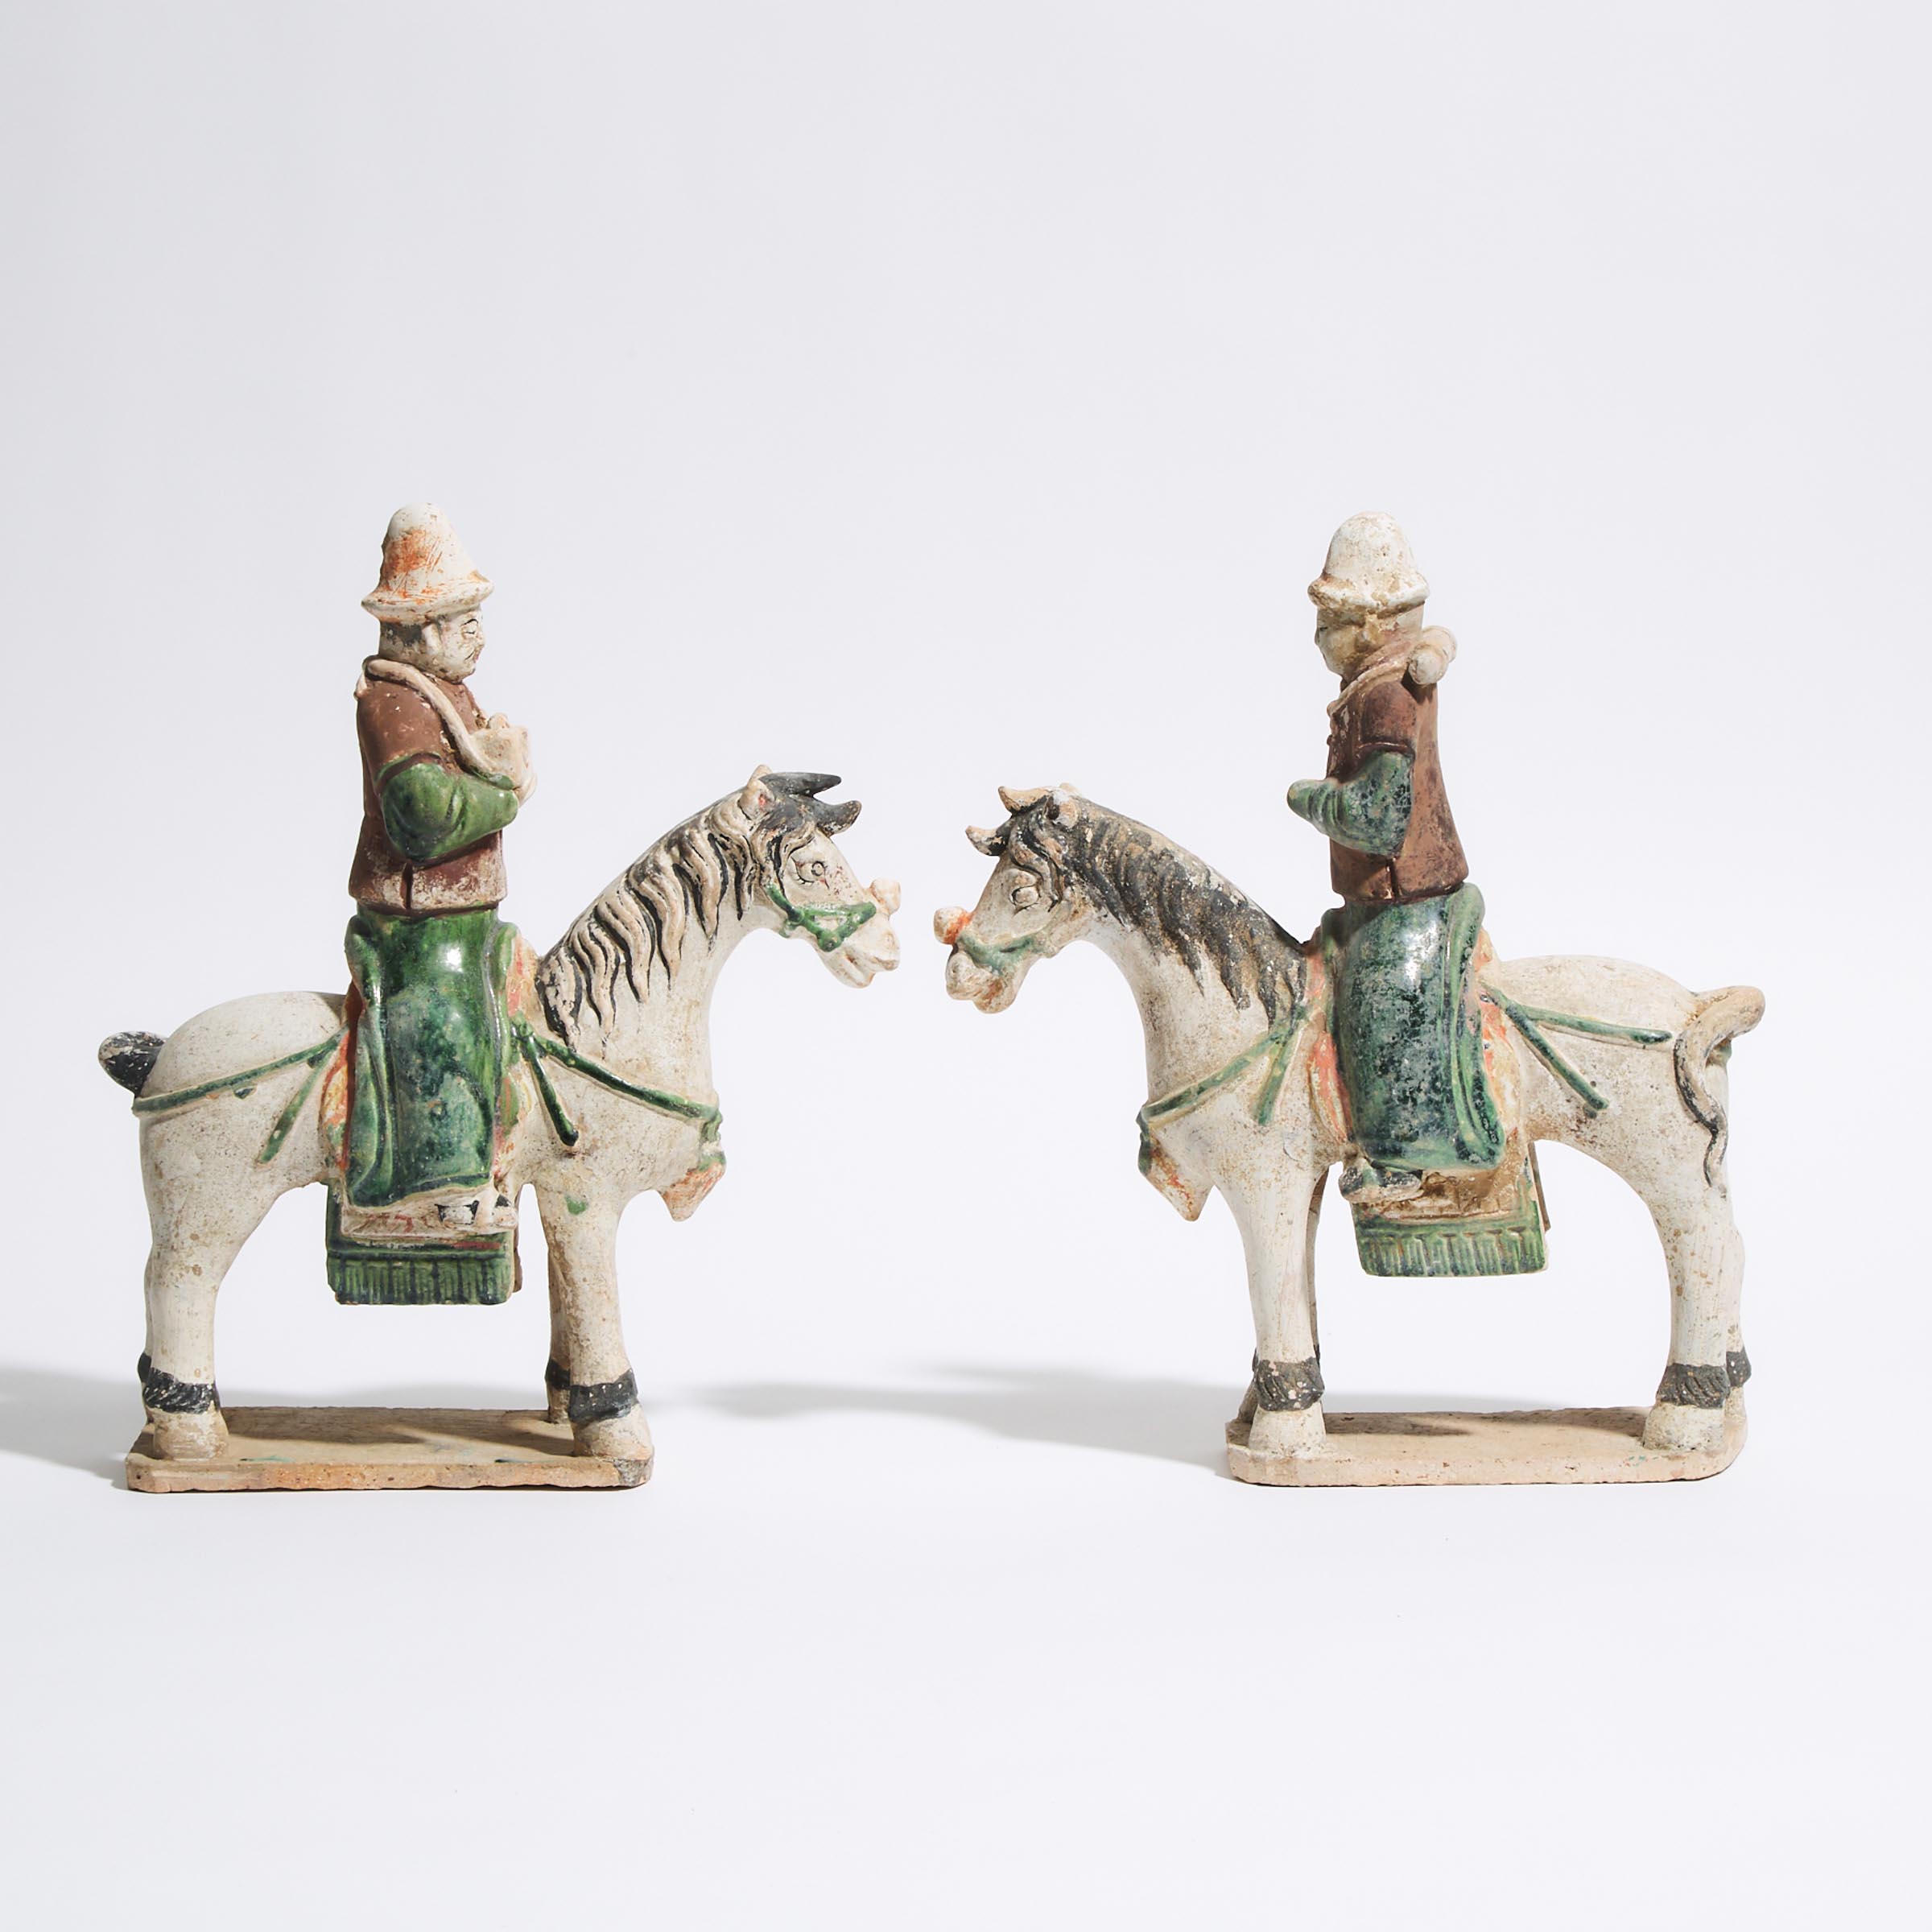 A Pair of Glazed Pottery Horses and Riders, Ming Dynasty (1368-1644)